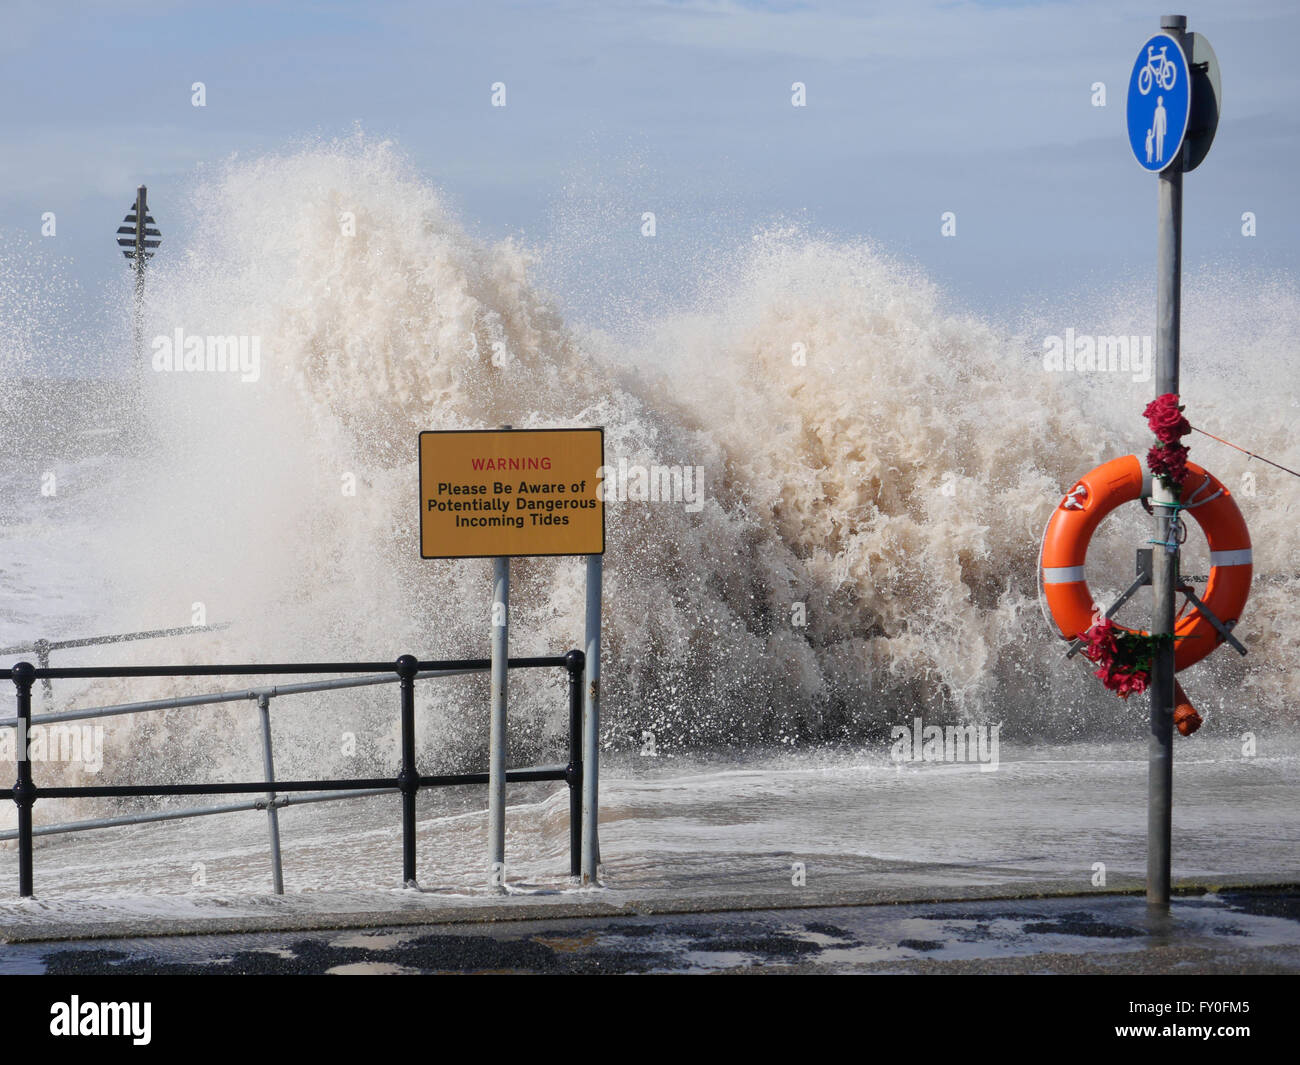 UK Weather. Crosby. Merseyside UK. 7th April 2016. A windy  day during high tide at Crosby Beach makes for some spectacular waves. © Alan Edwards/Alamy Live News Stock Photo